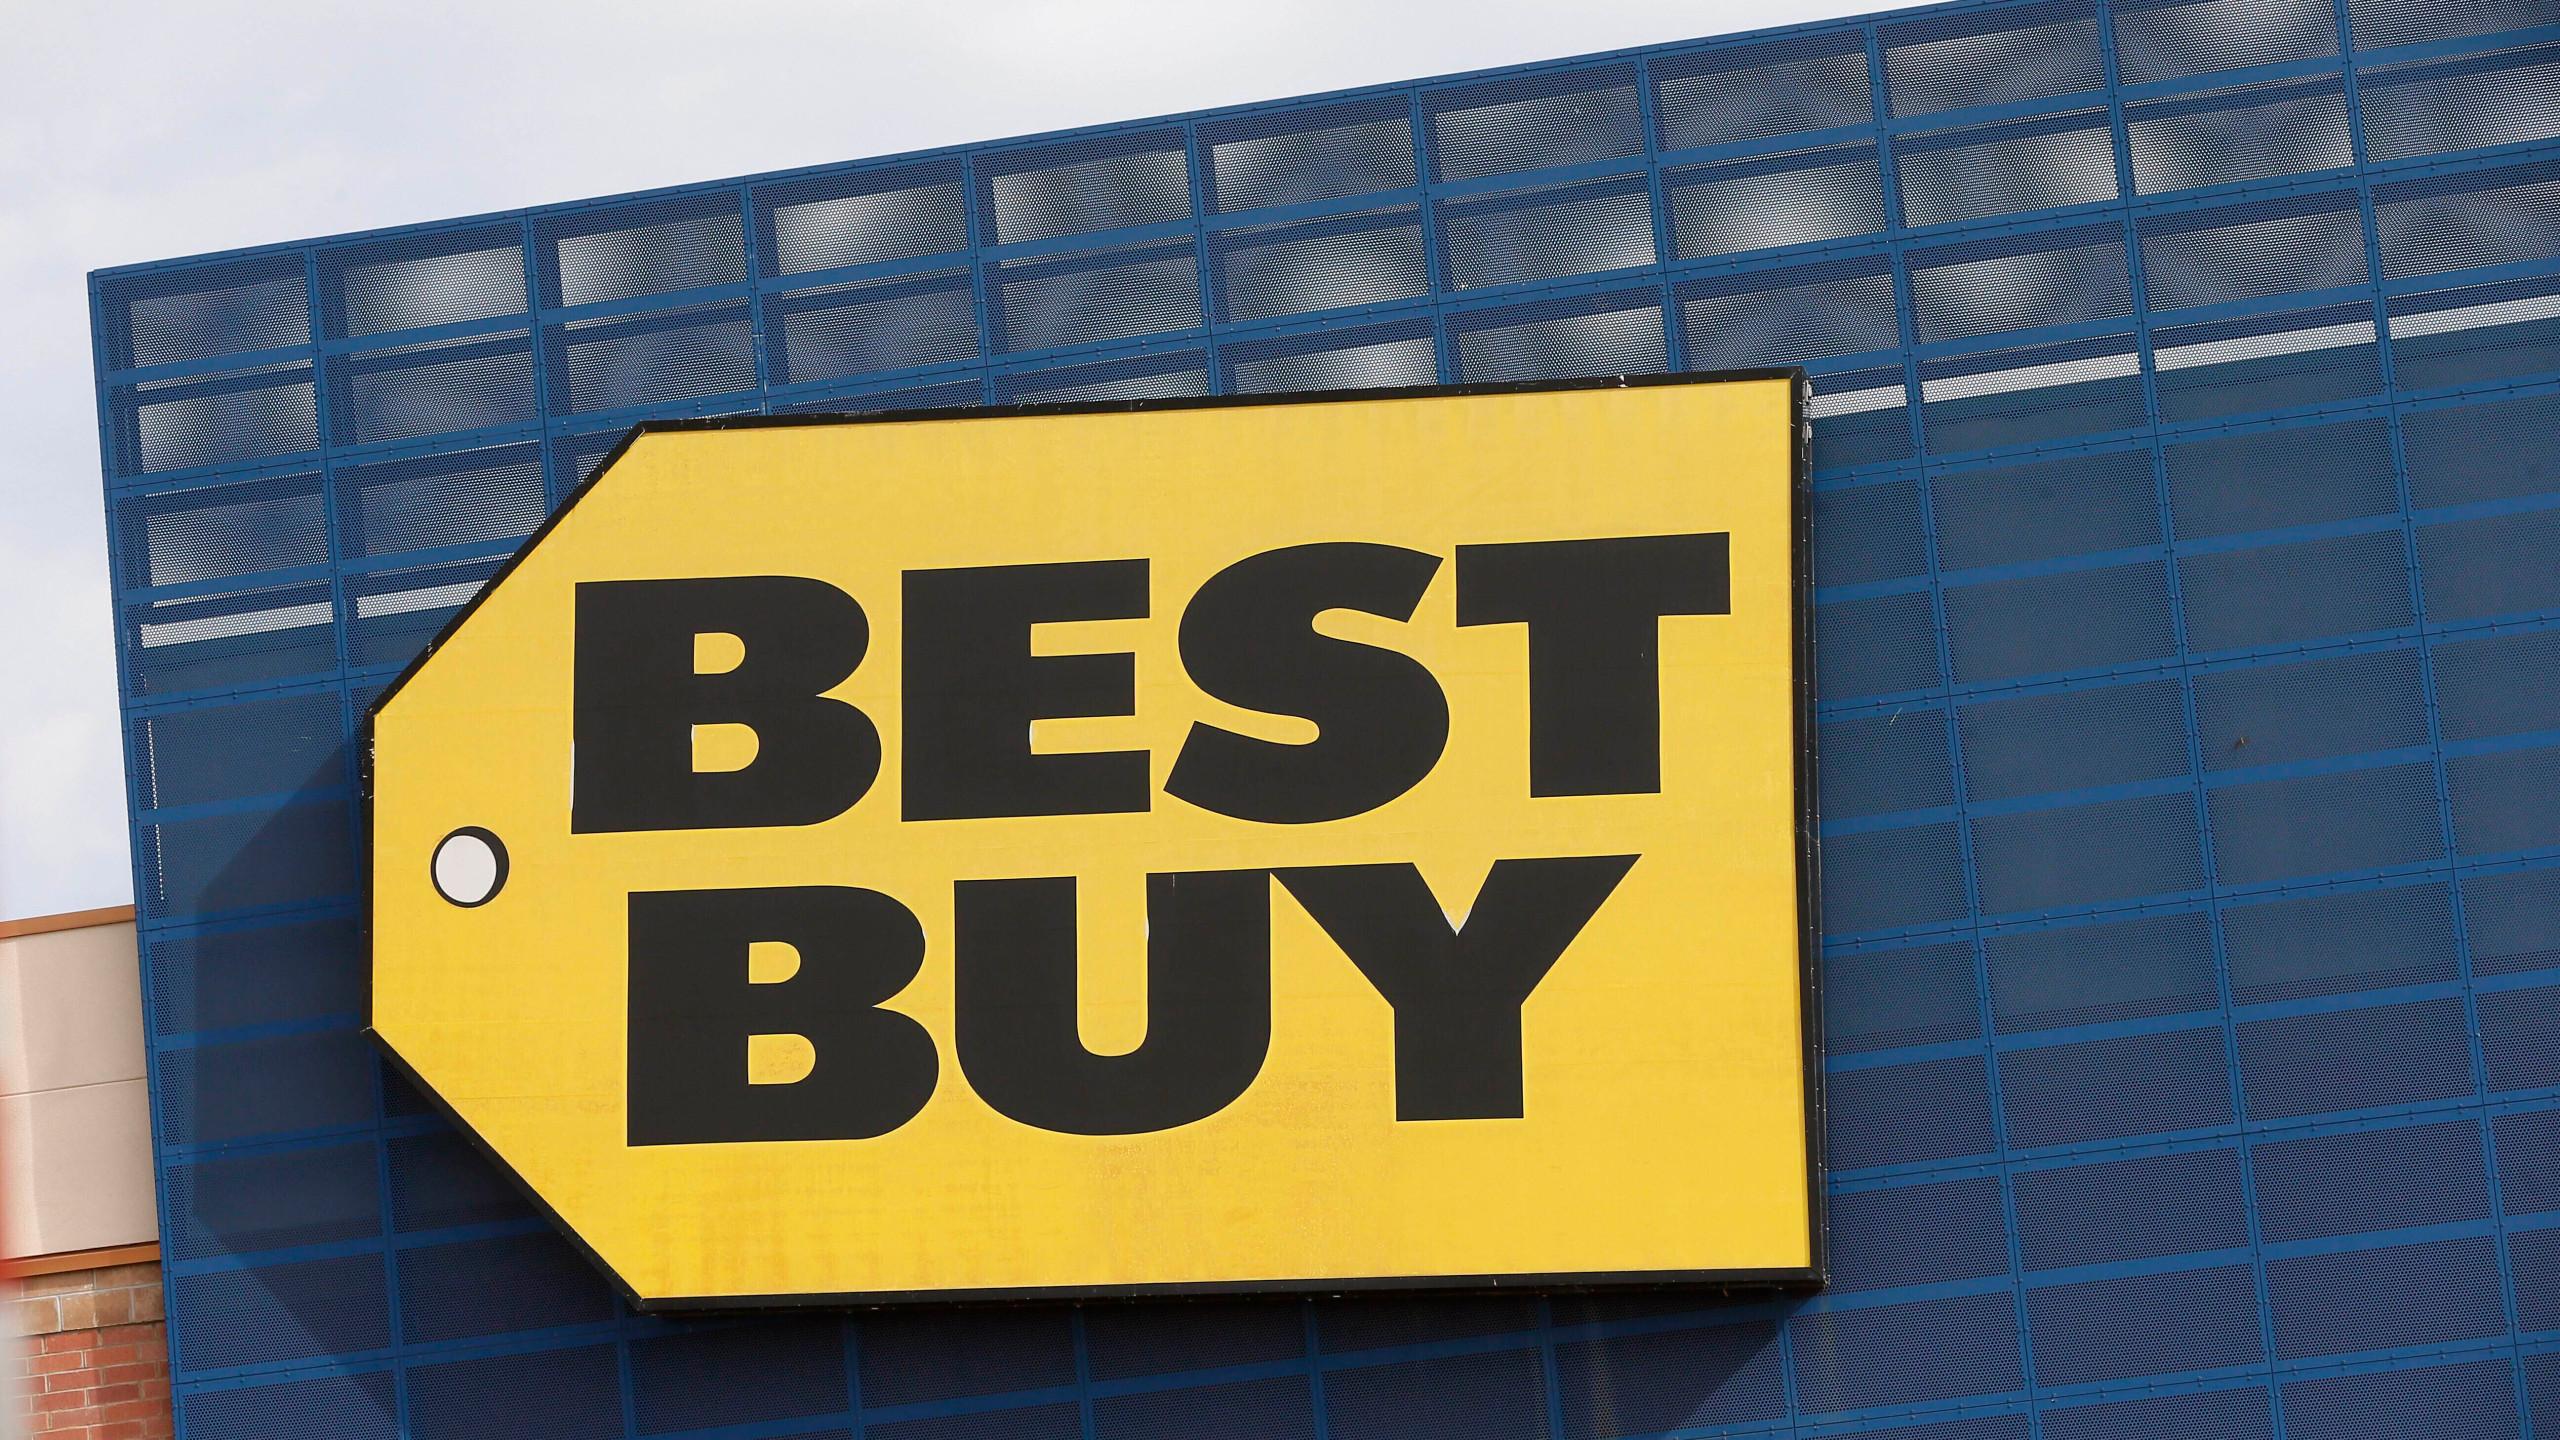 Best Buy Logo - No customers inside Best Buy stores, switching to curbside service ...